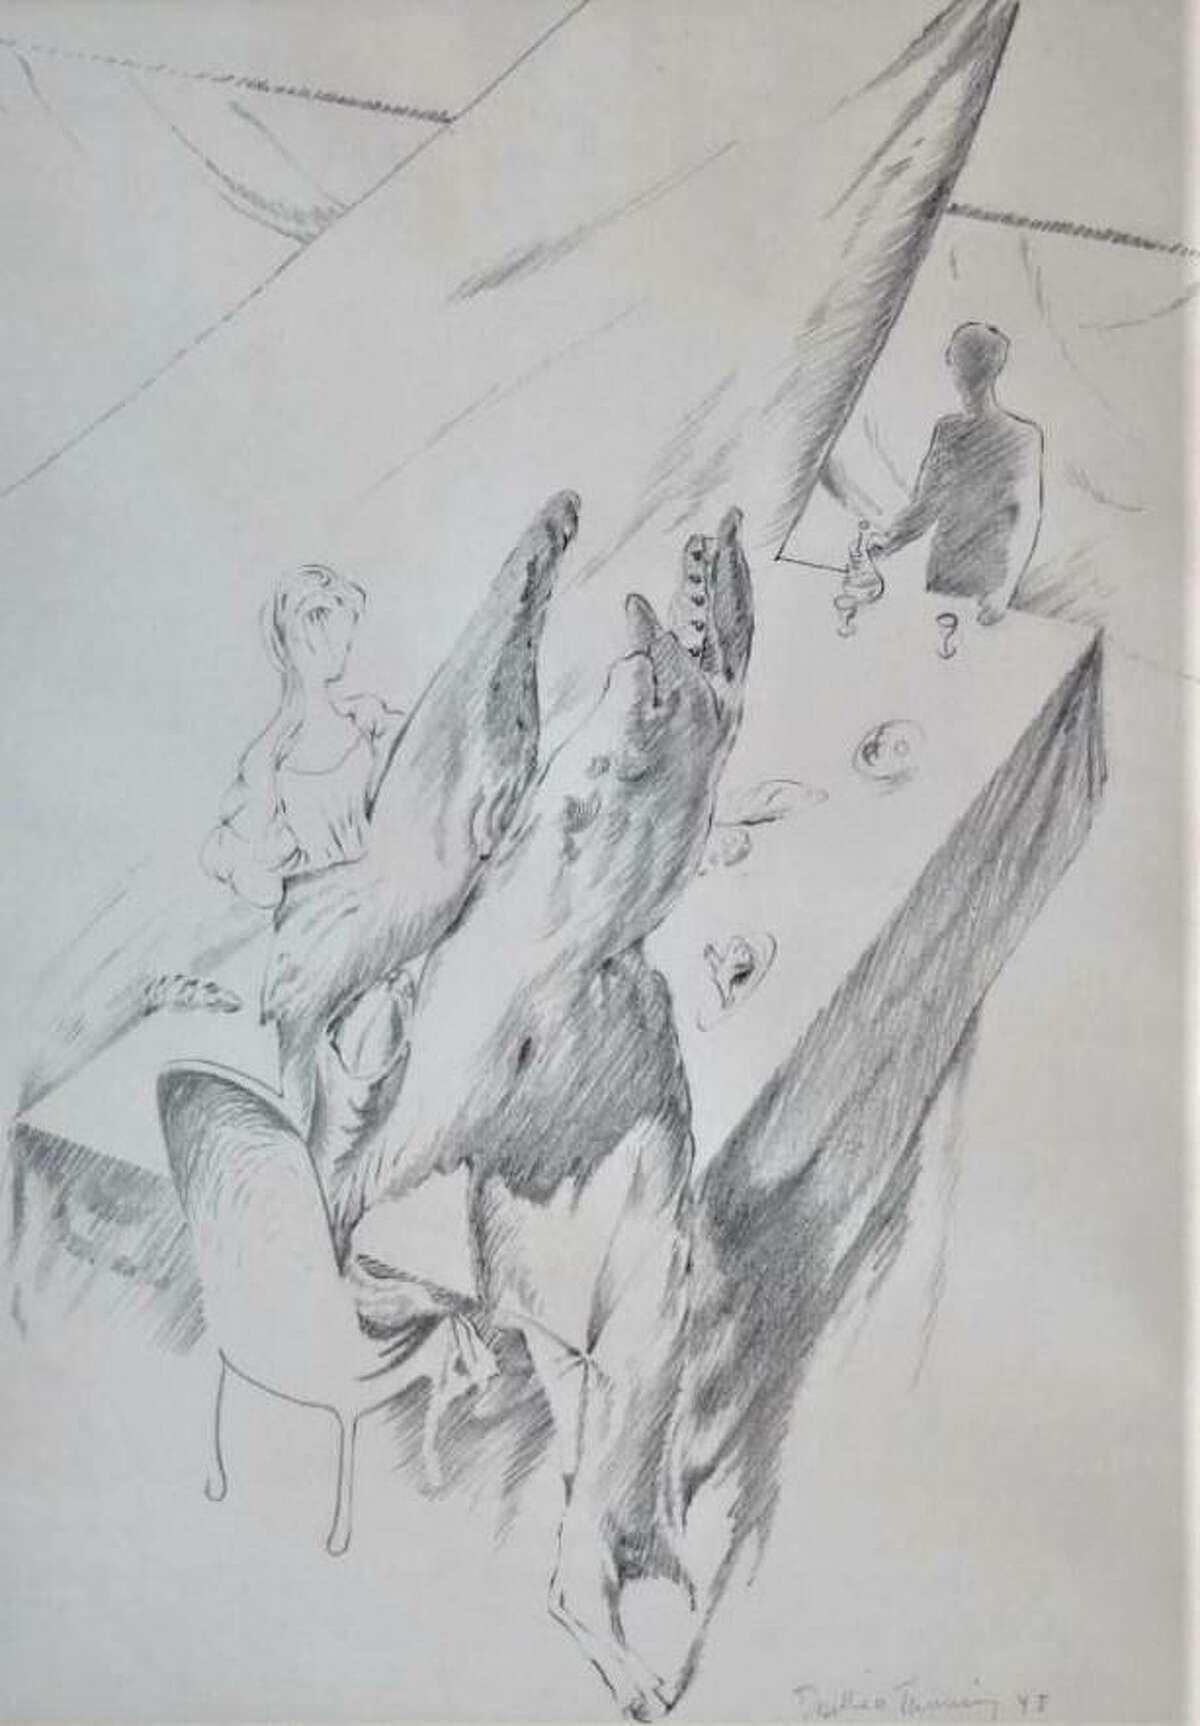 Dorothea Tanning's pencil study for "My Dinner Party" is on view in "Women Surrealists" at Redbud Gallery through Aug. 27.